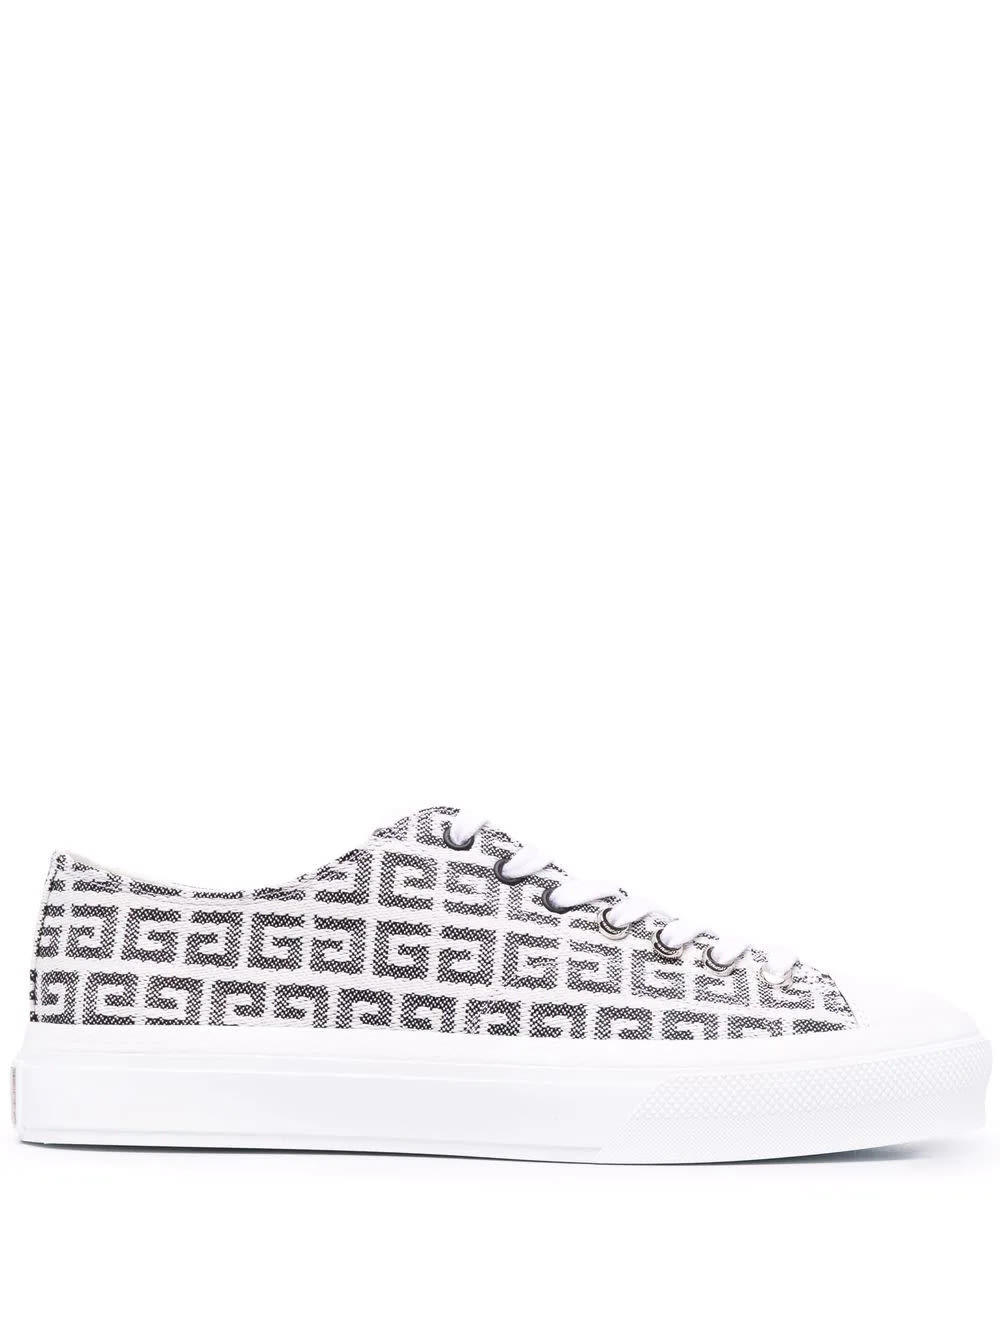 Givenchy Man City Sneakers In Grey And White 4g Jacquard